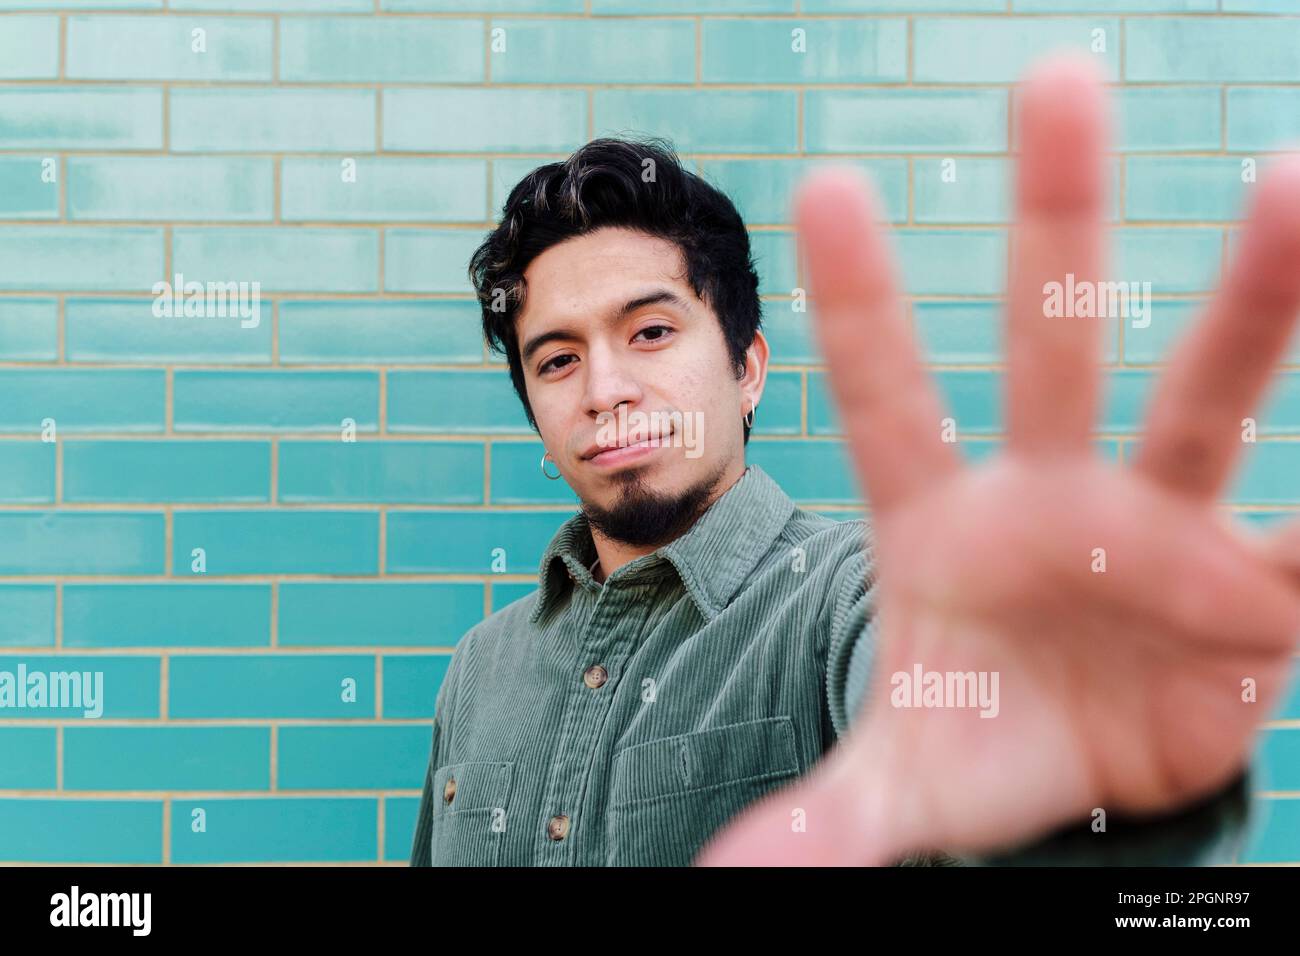 Young man stop gesturing in front of brick wall Stock Photo